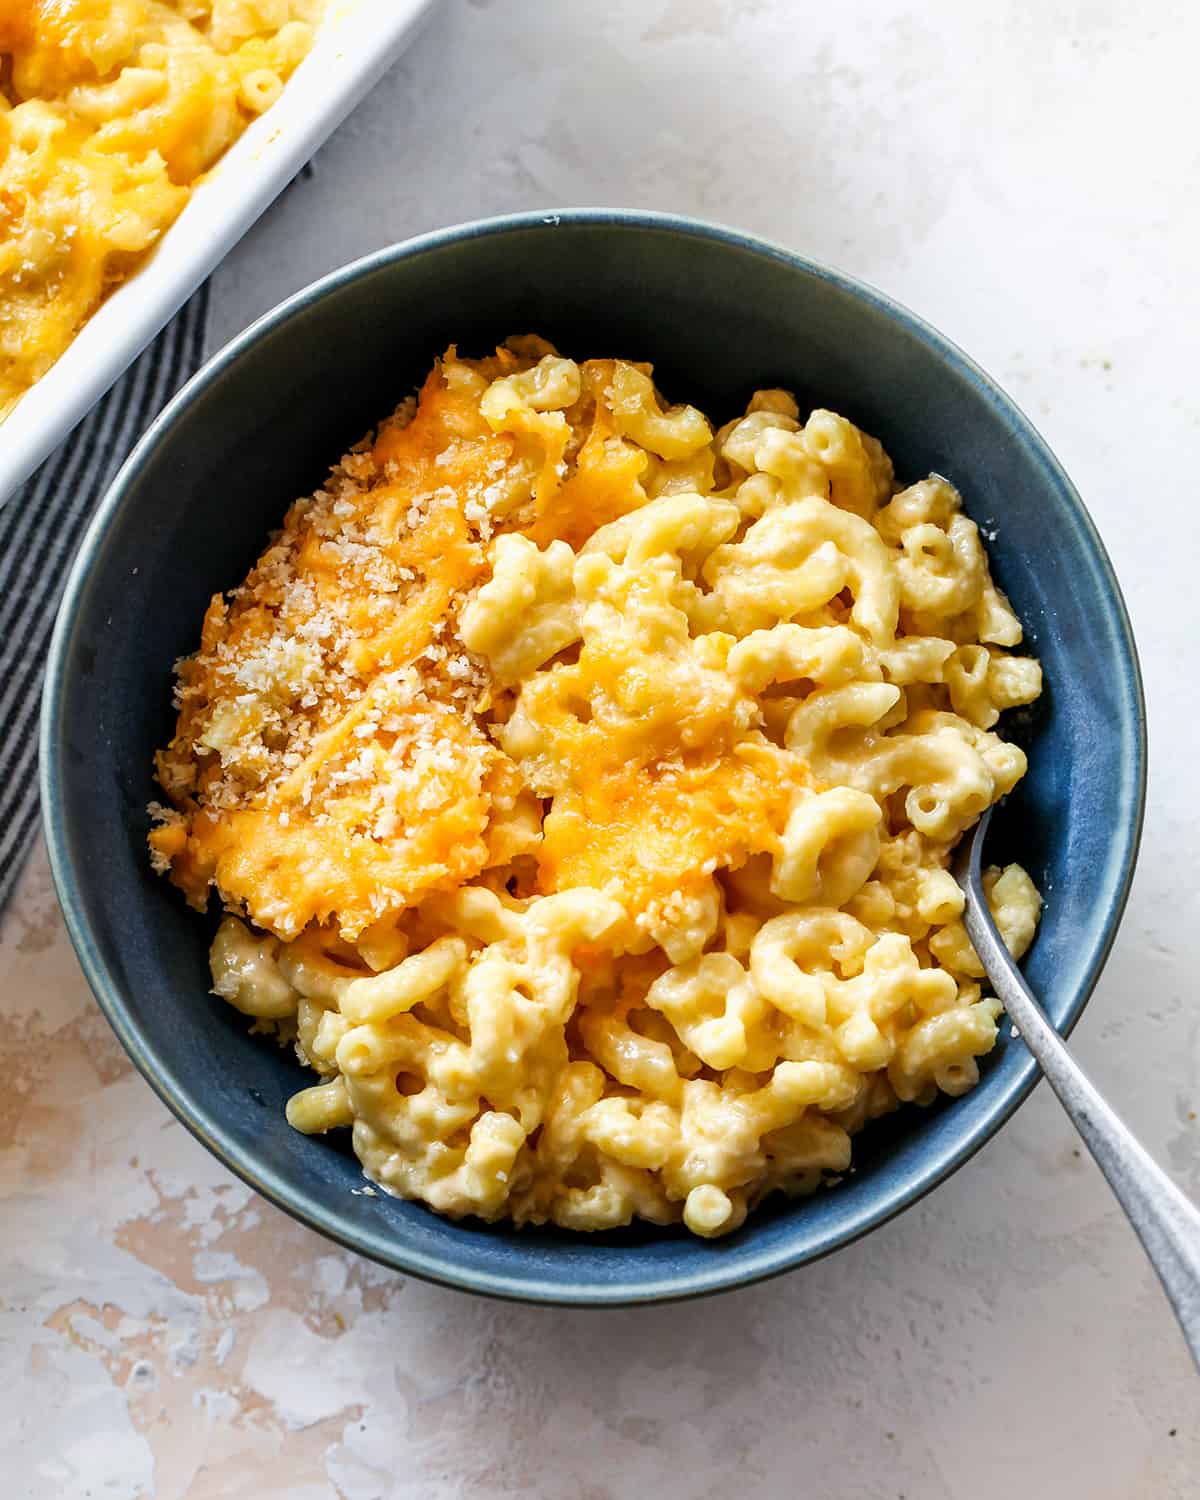 Baked Mac and Cheese in a blue bowl with a spoon